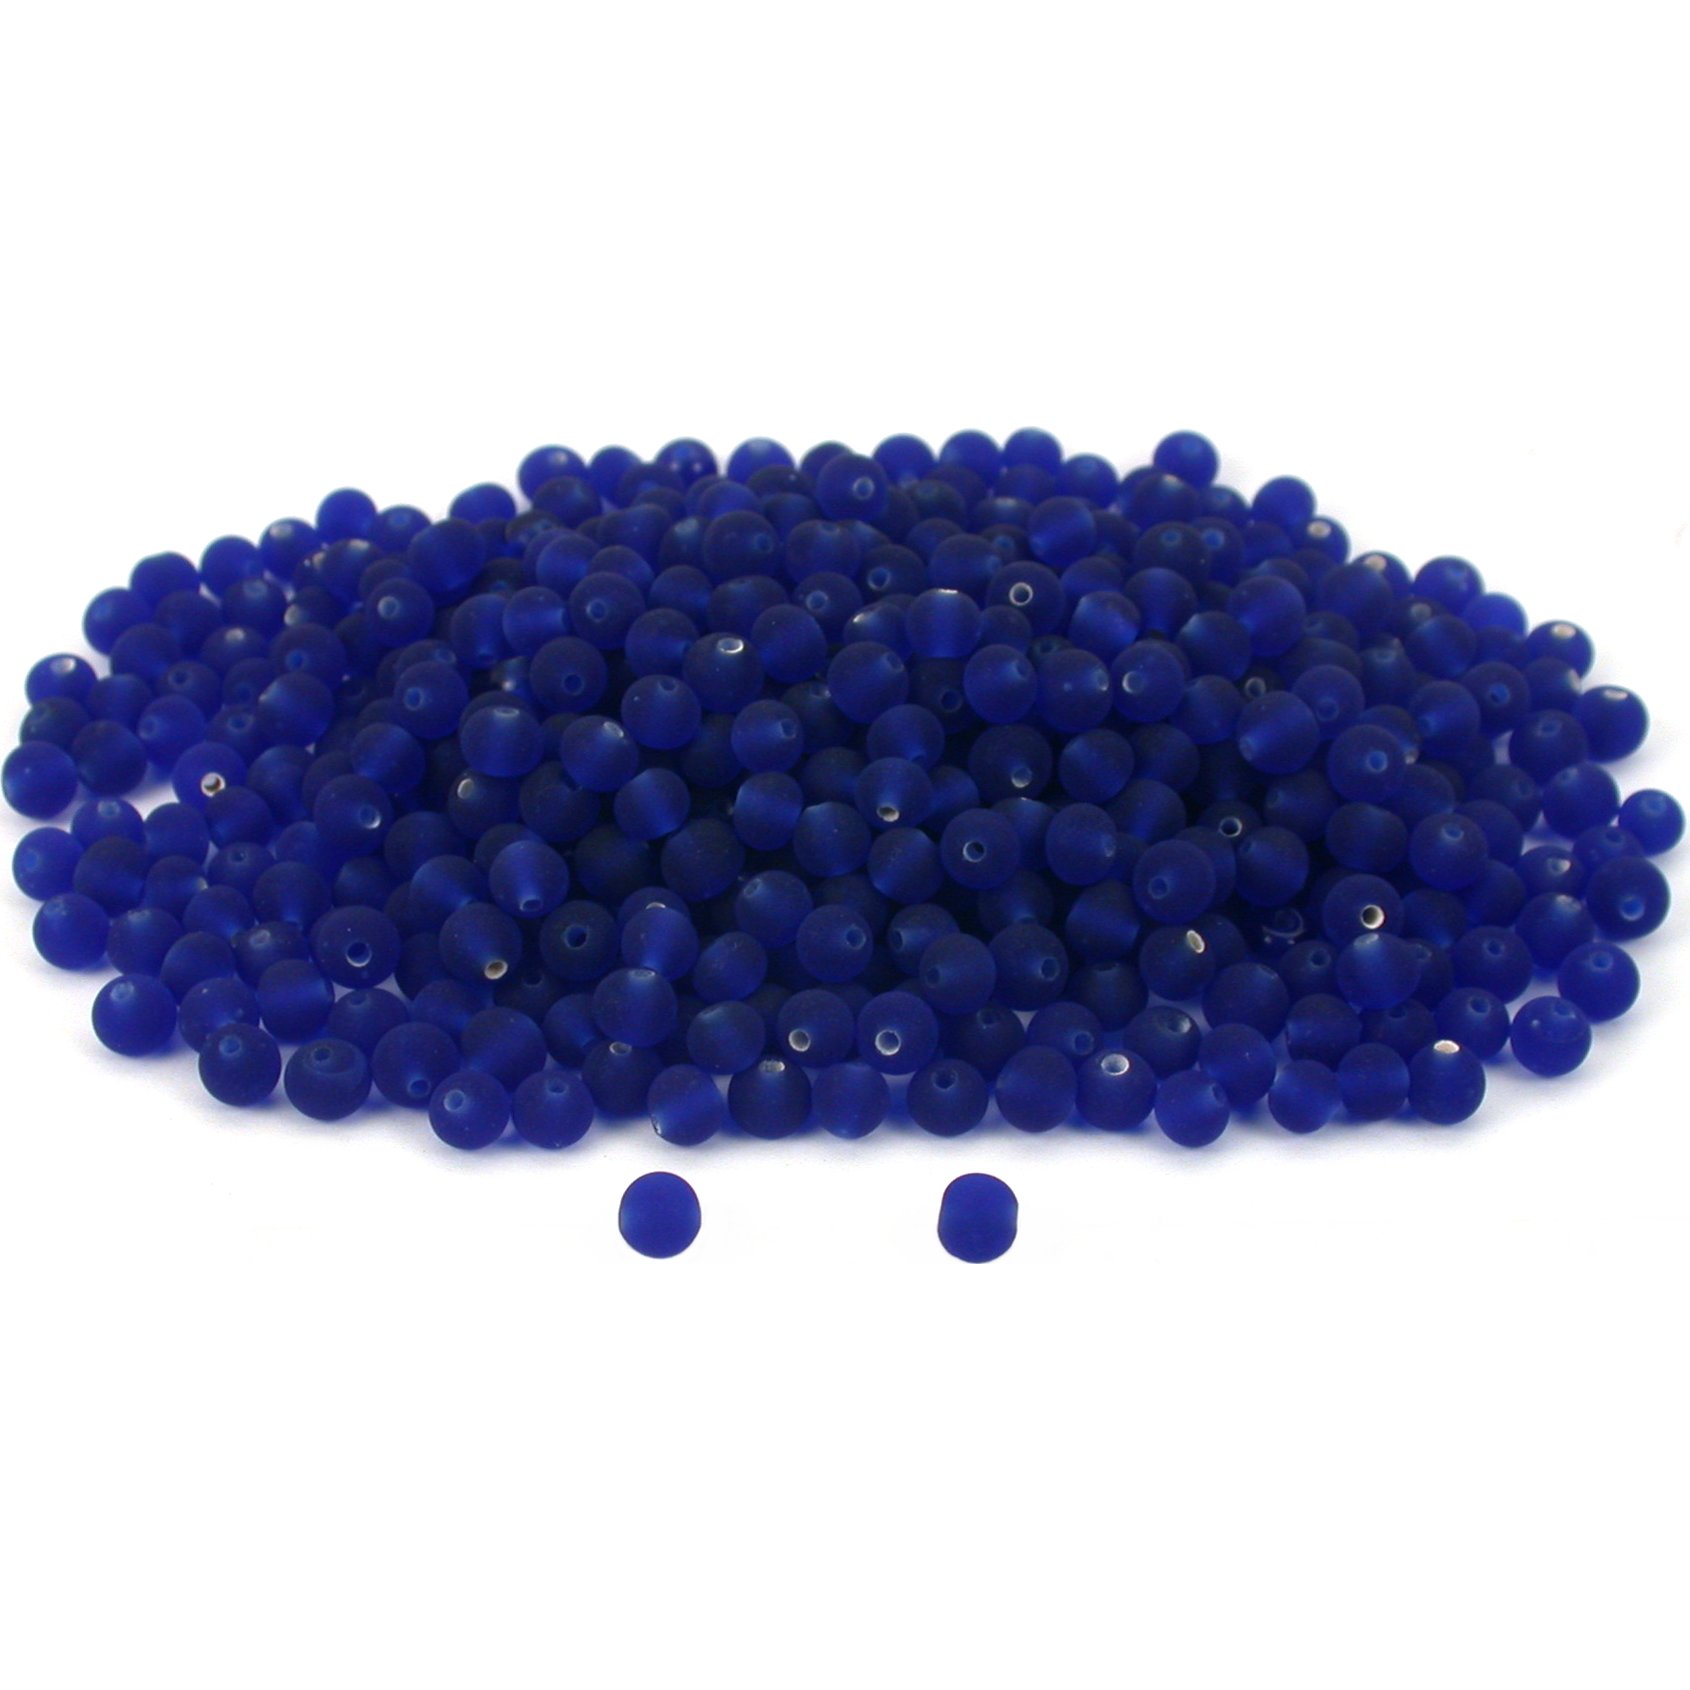 Findingking 50 Grams Dark Blue Evelina Frosted Glass Beads 4.5mm